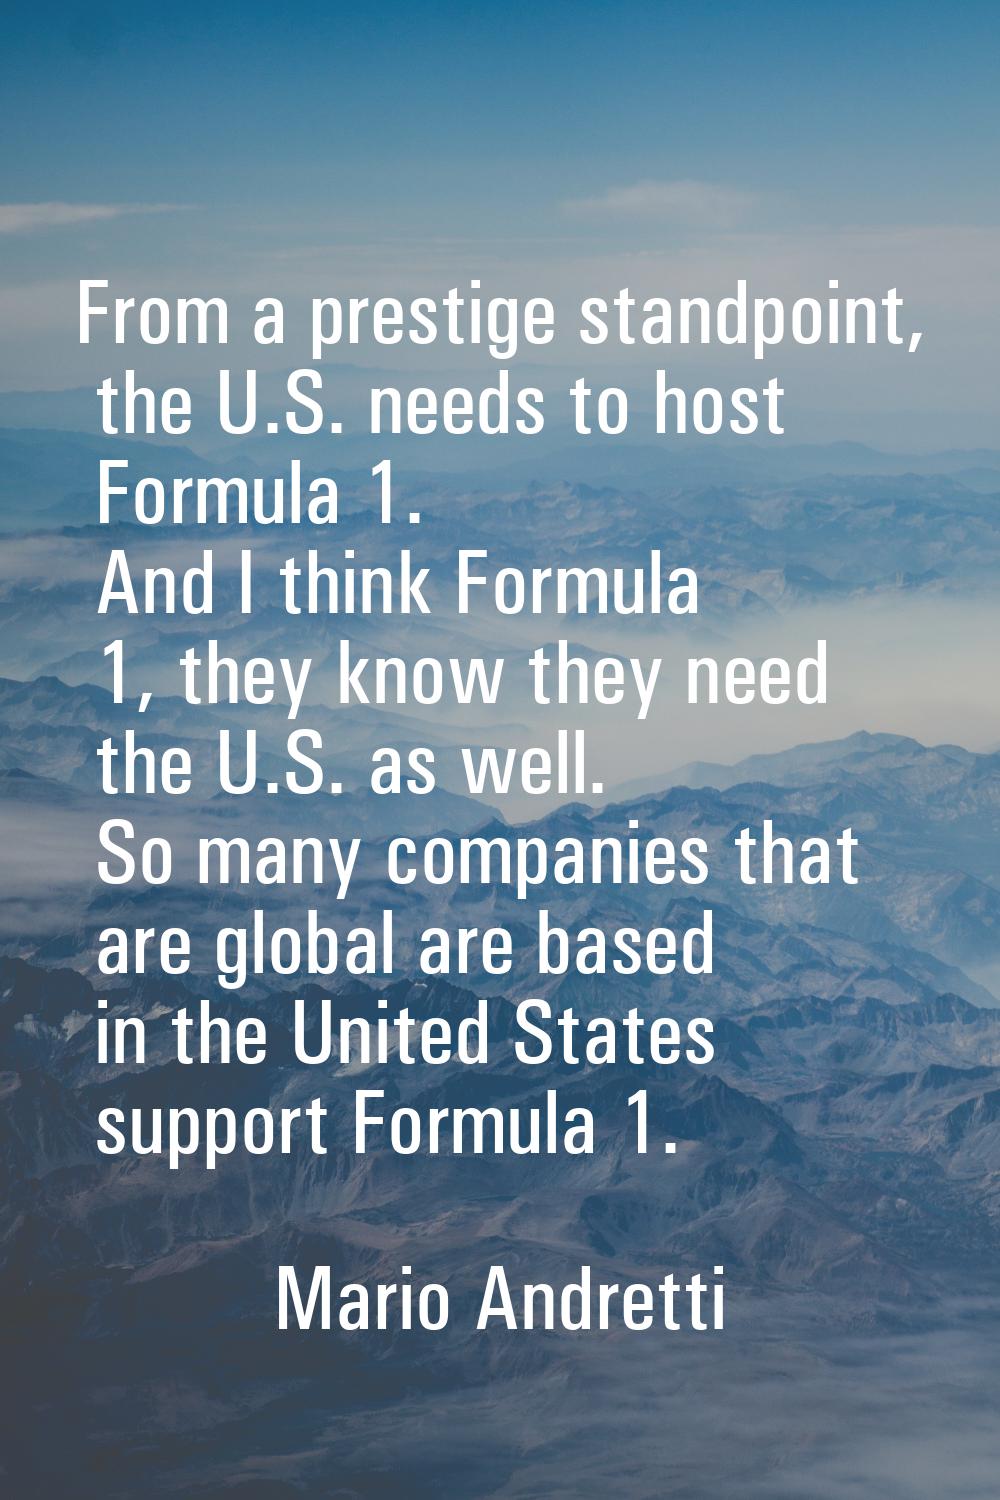 From a prestige standpoint, the U.S. needs to host Formula 1. And I think Formula 1, they know they